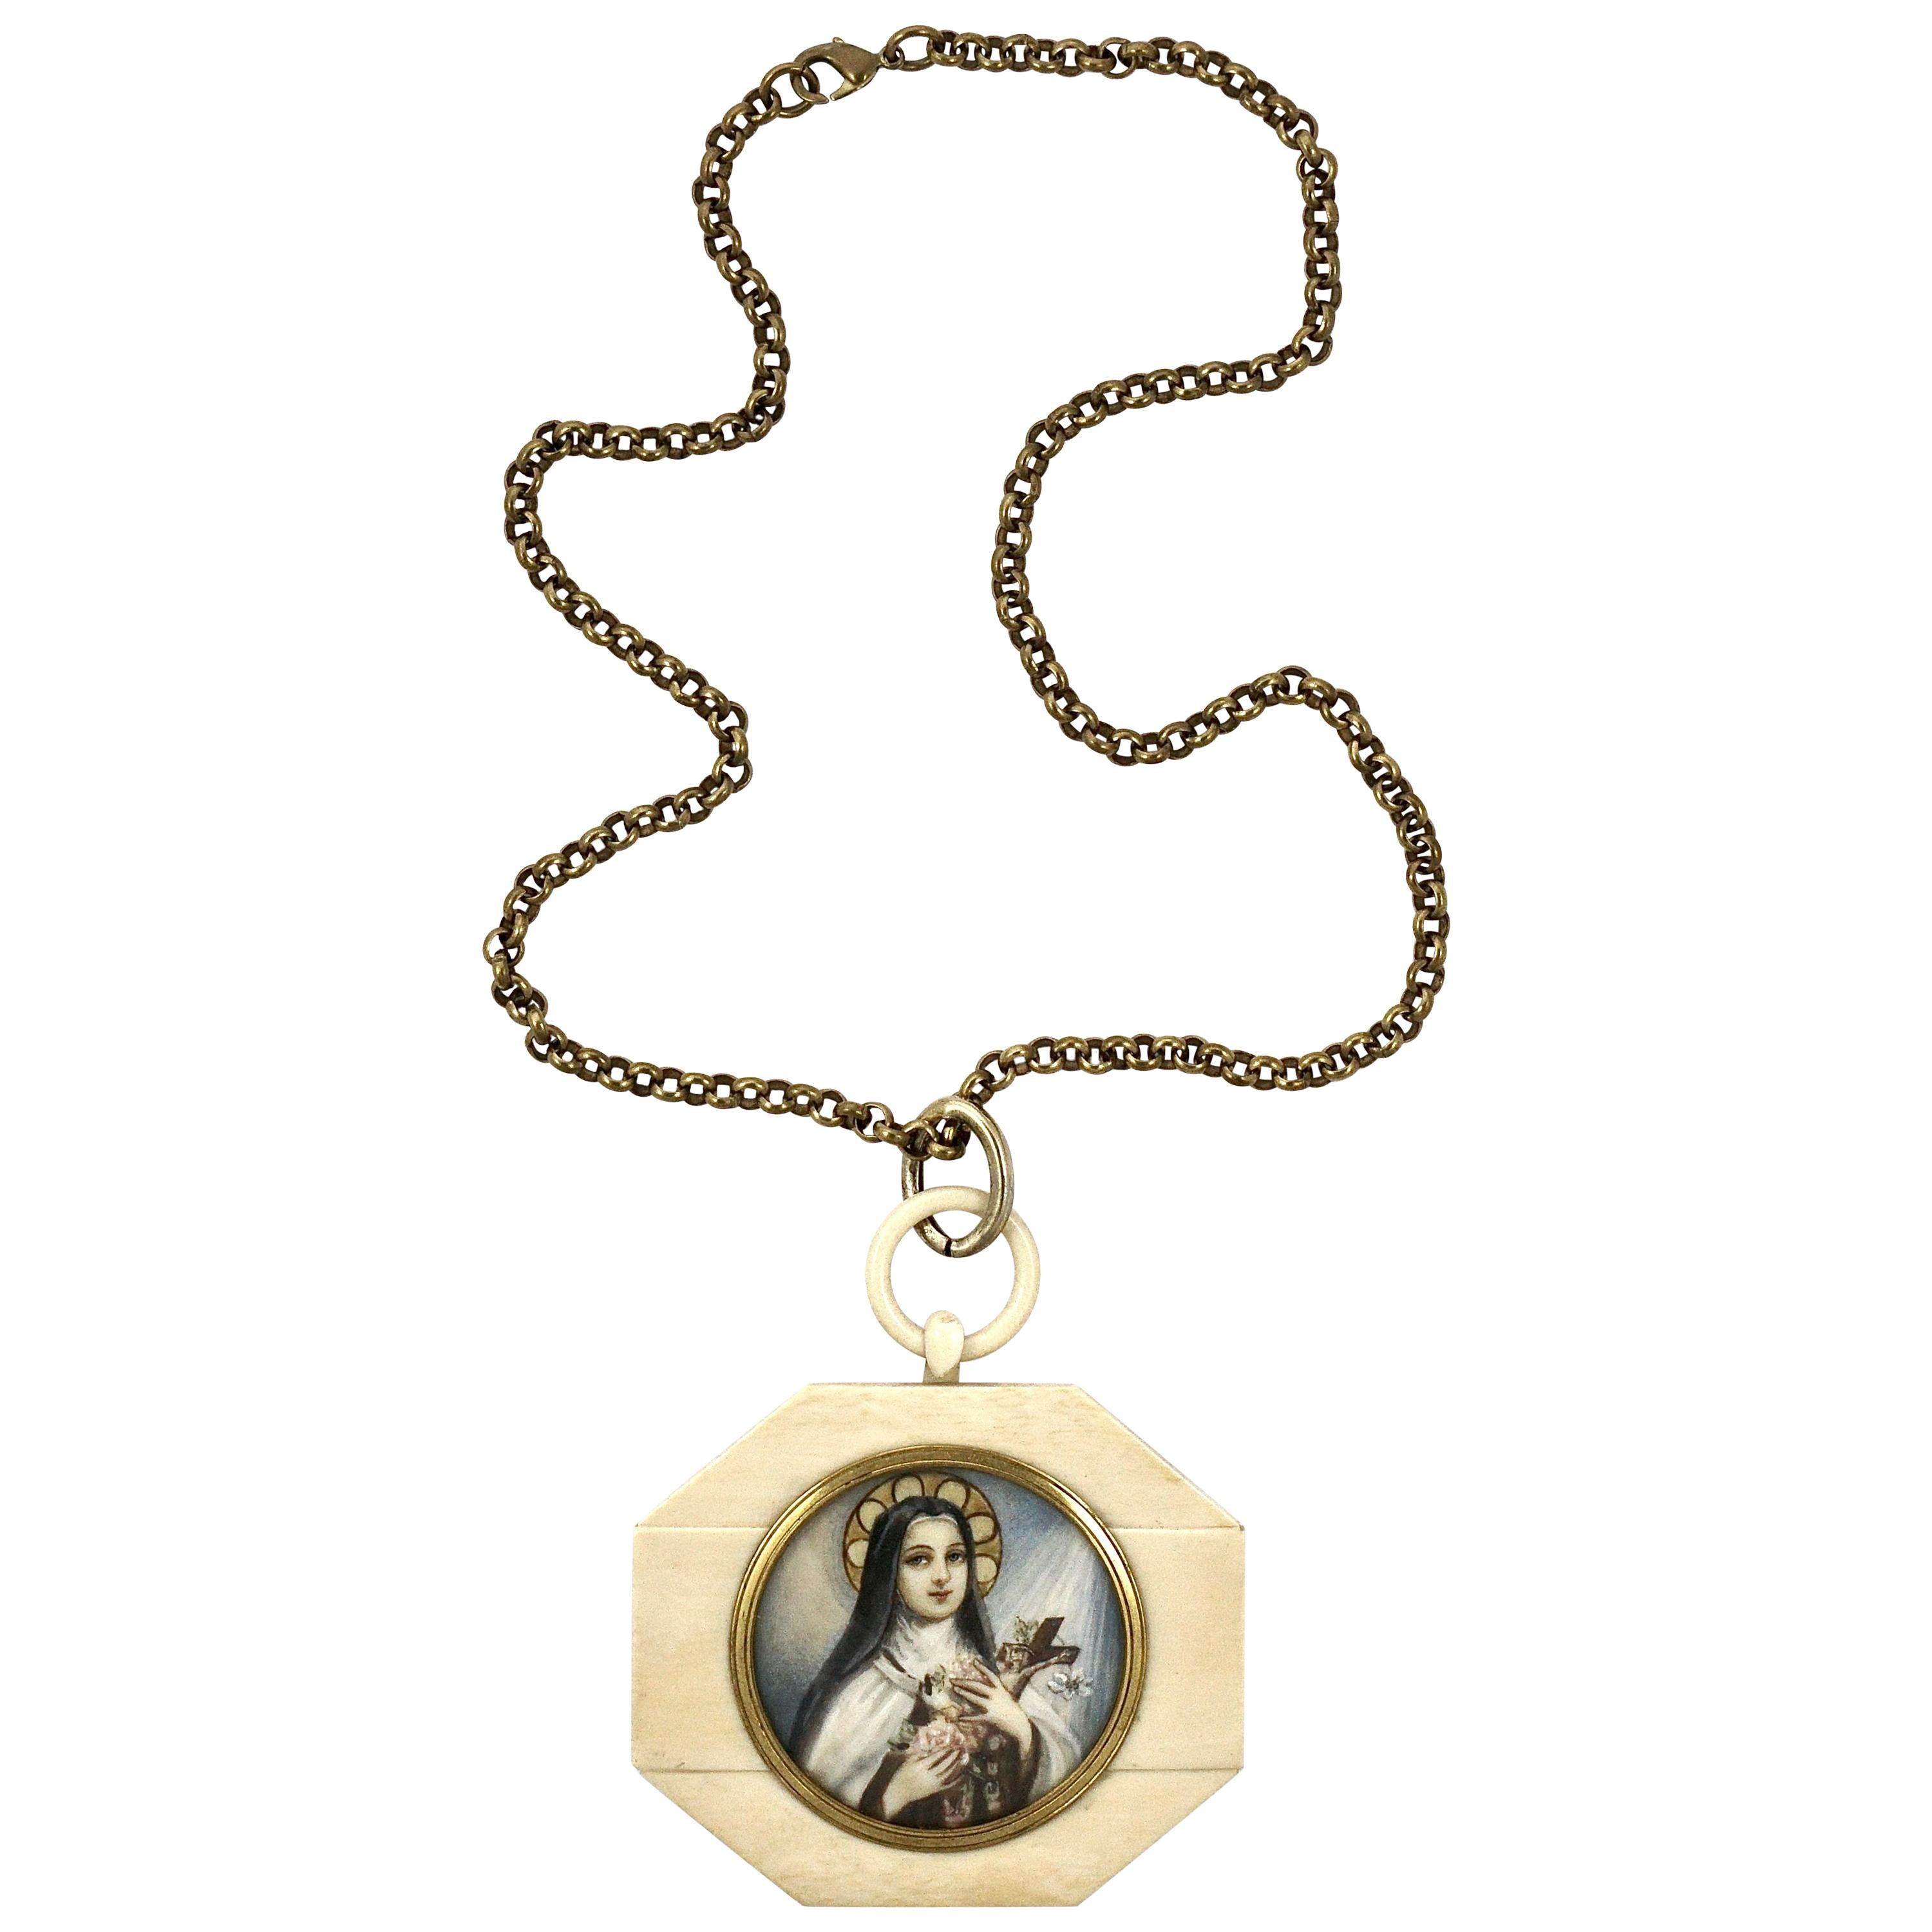 Vintage Gold Chain Necklace With Celluloid Pendant